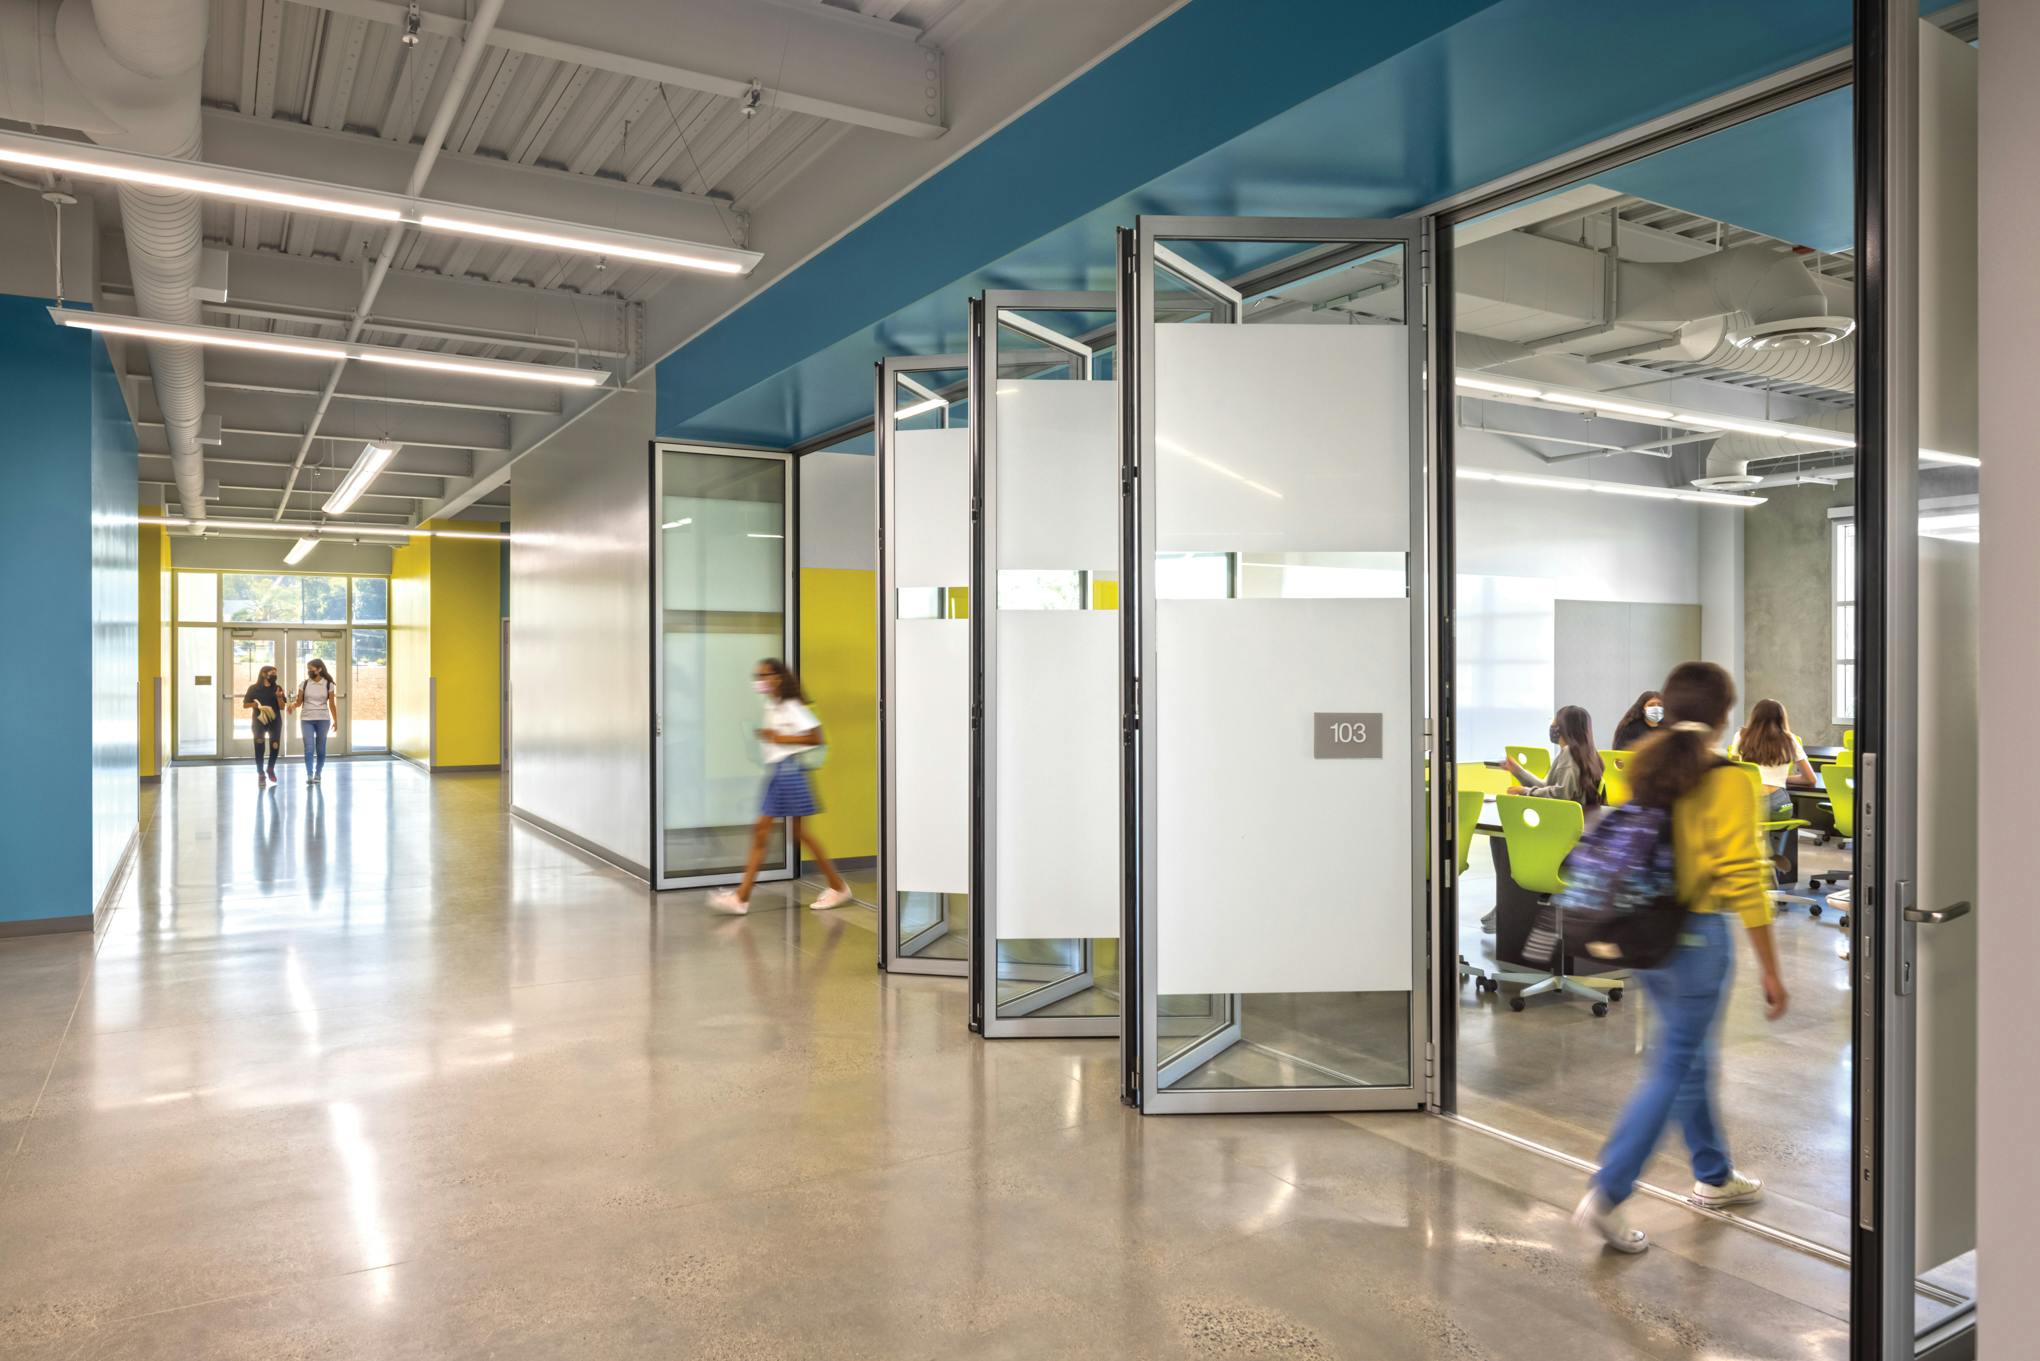 21st century learning with Generation 4 folding glass walls